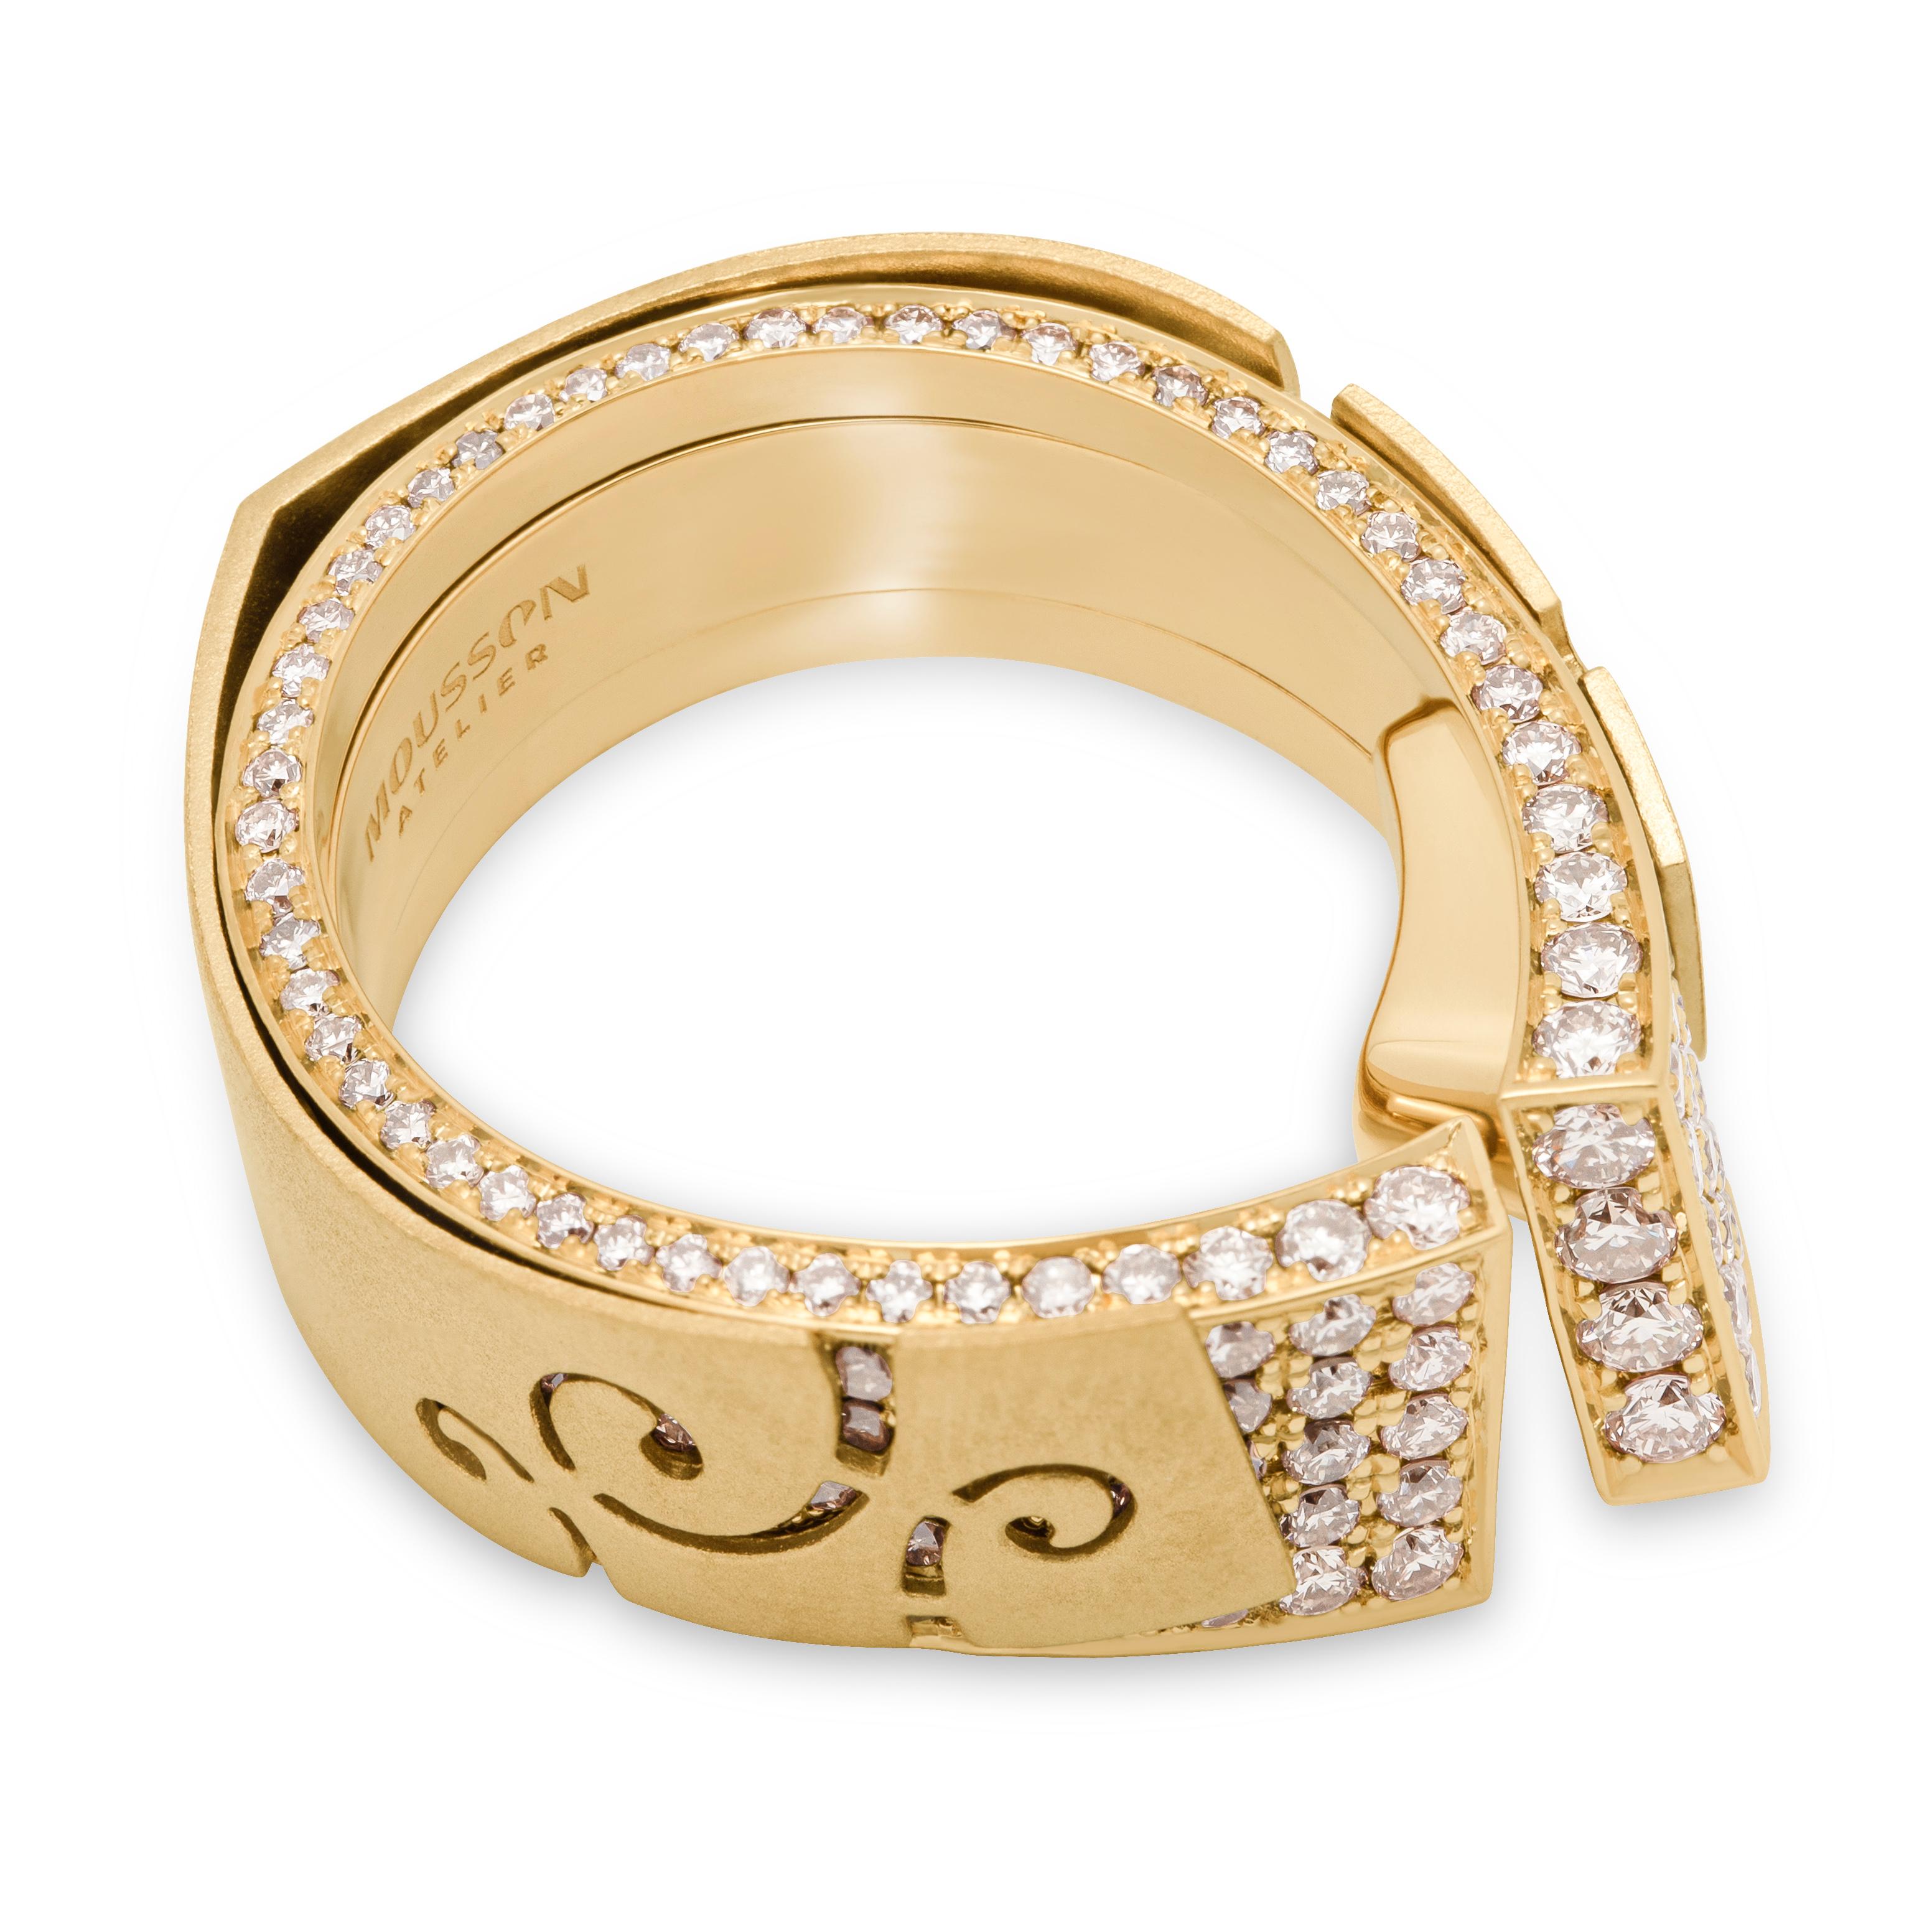 Champagne Diamonds 18 Karat Yellow Gold Pret-a-Porter Pendant Suite

Veil inspired this jewelry series by our designers. For example, this Suite seems to have two layers. The first layer is a 